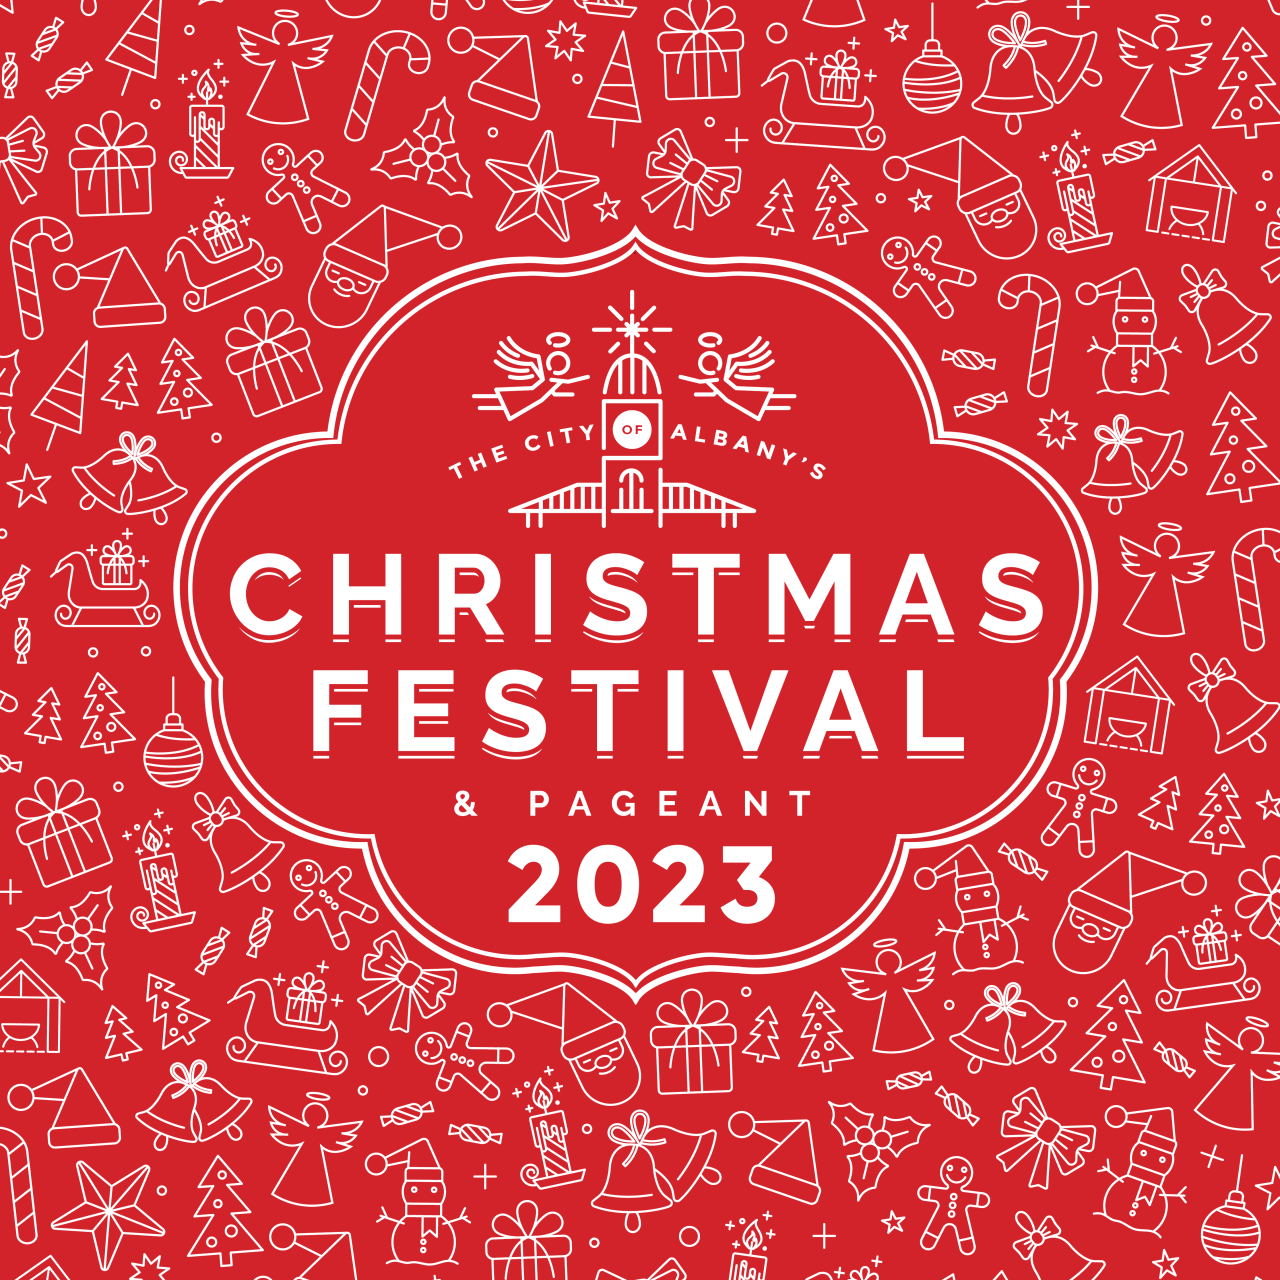 2023 Christmas Festival & Pageant